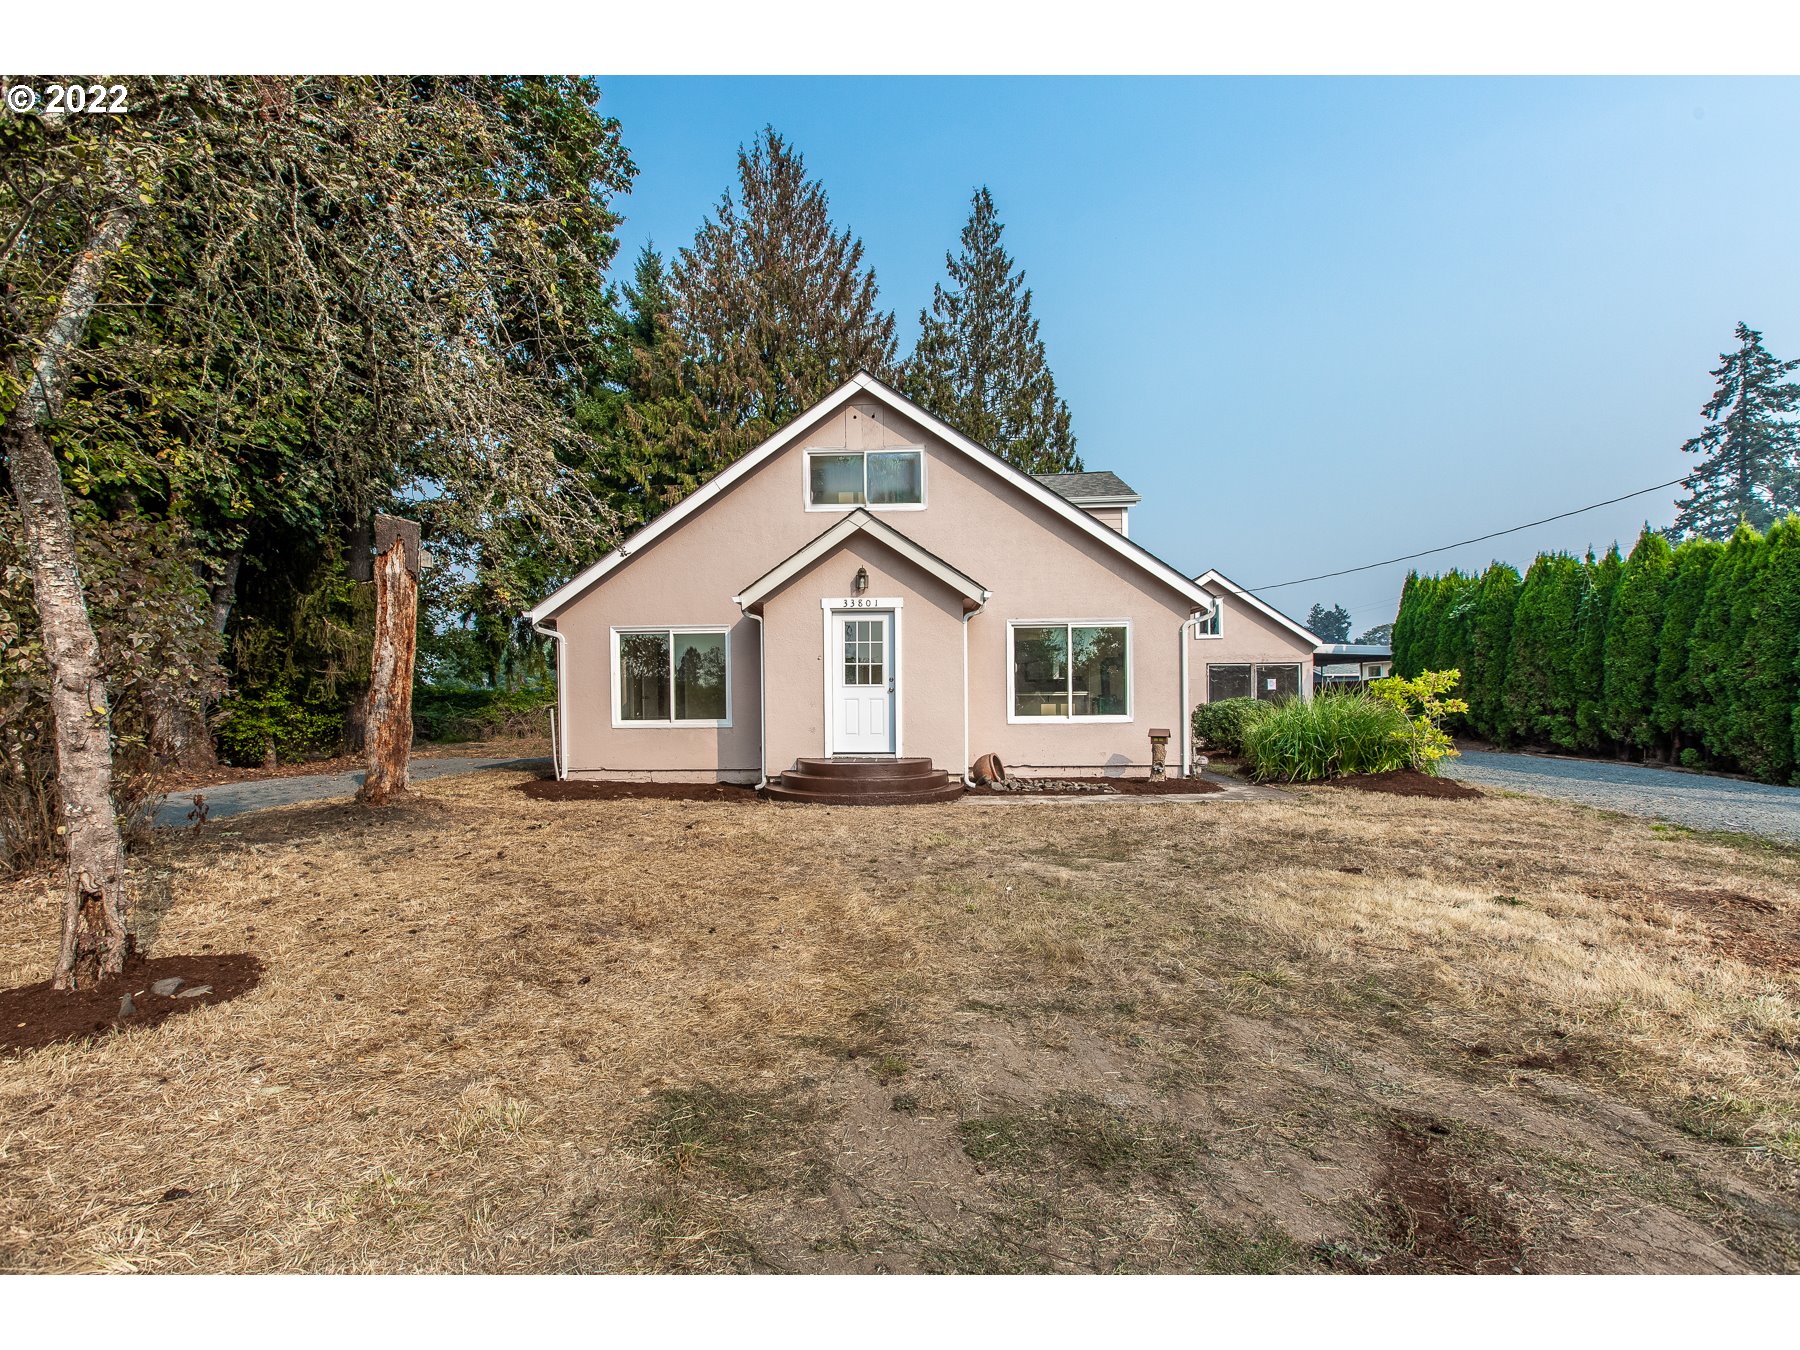 33801 ORCHARD AVE, Creswell, OR 97426